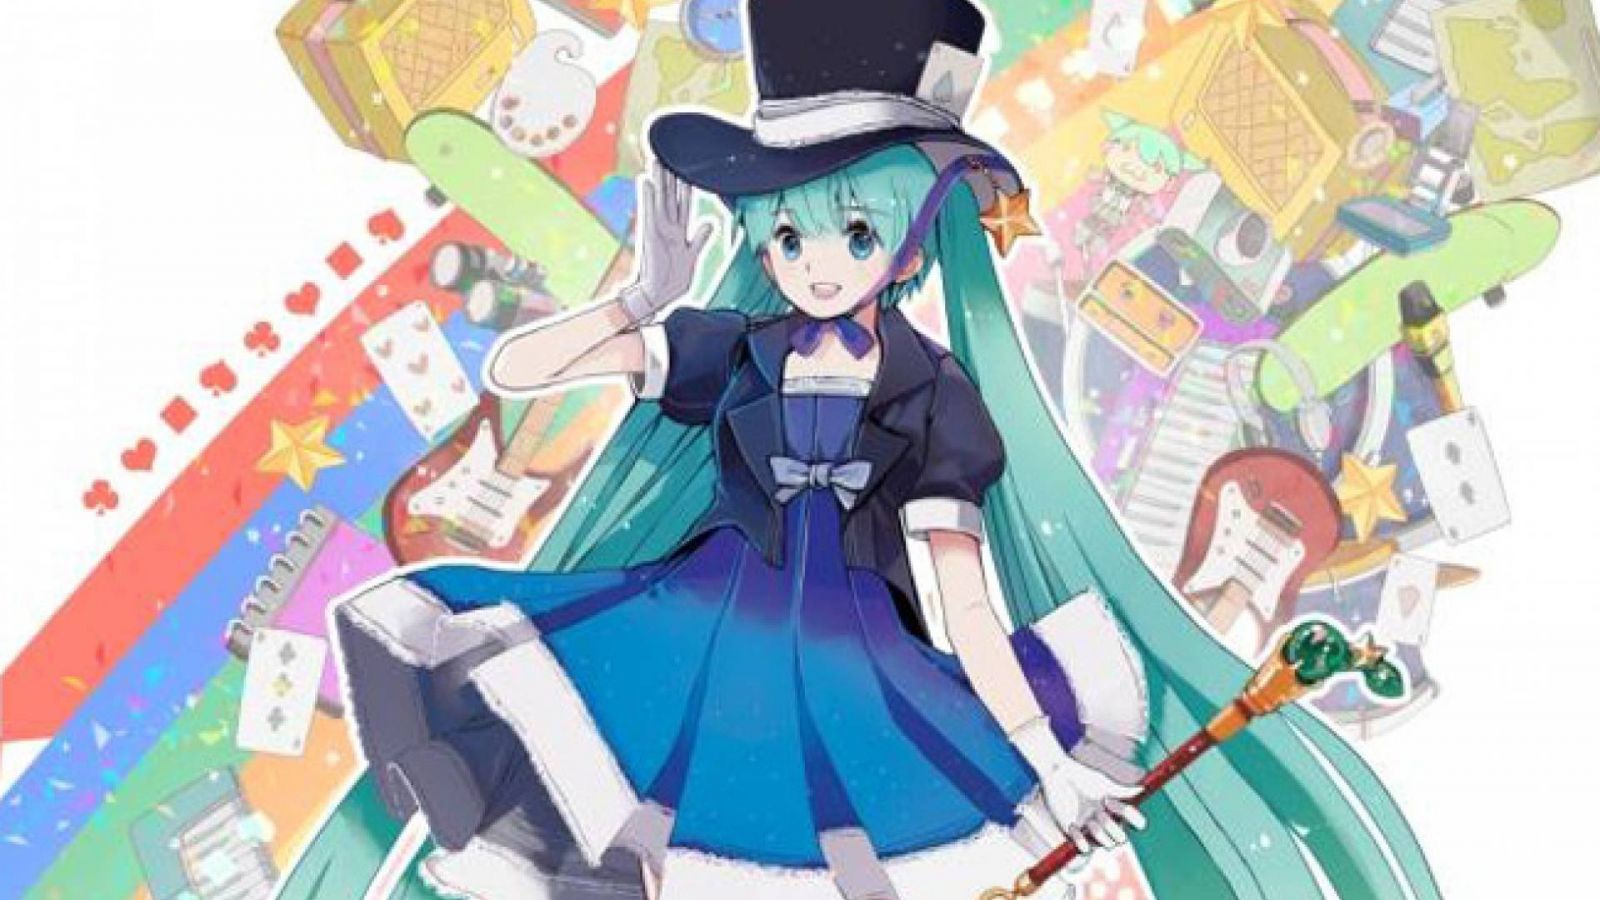 Delayed Broadcast of Hatsune Miku Concert to Be Shown Across the World © Crypton Future Media, Inc.